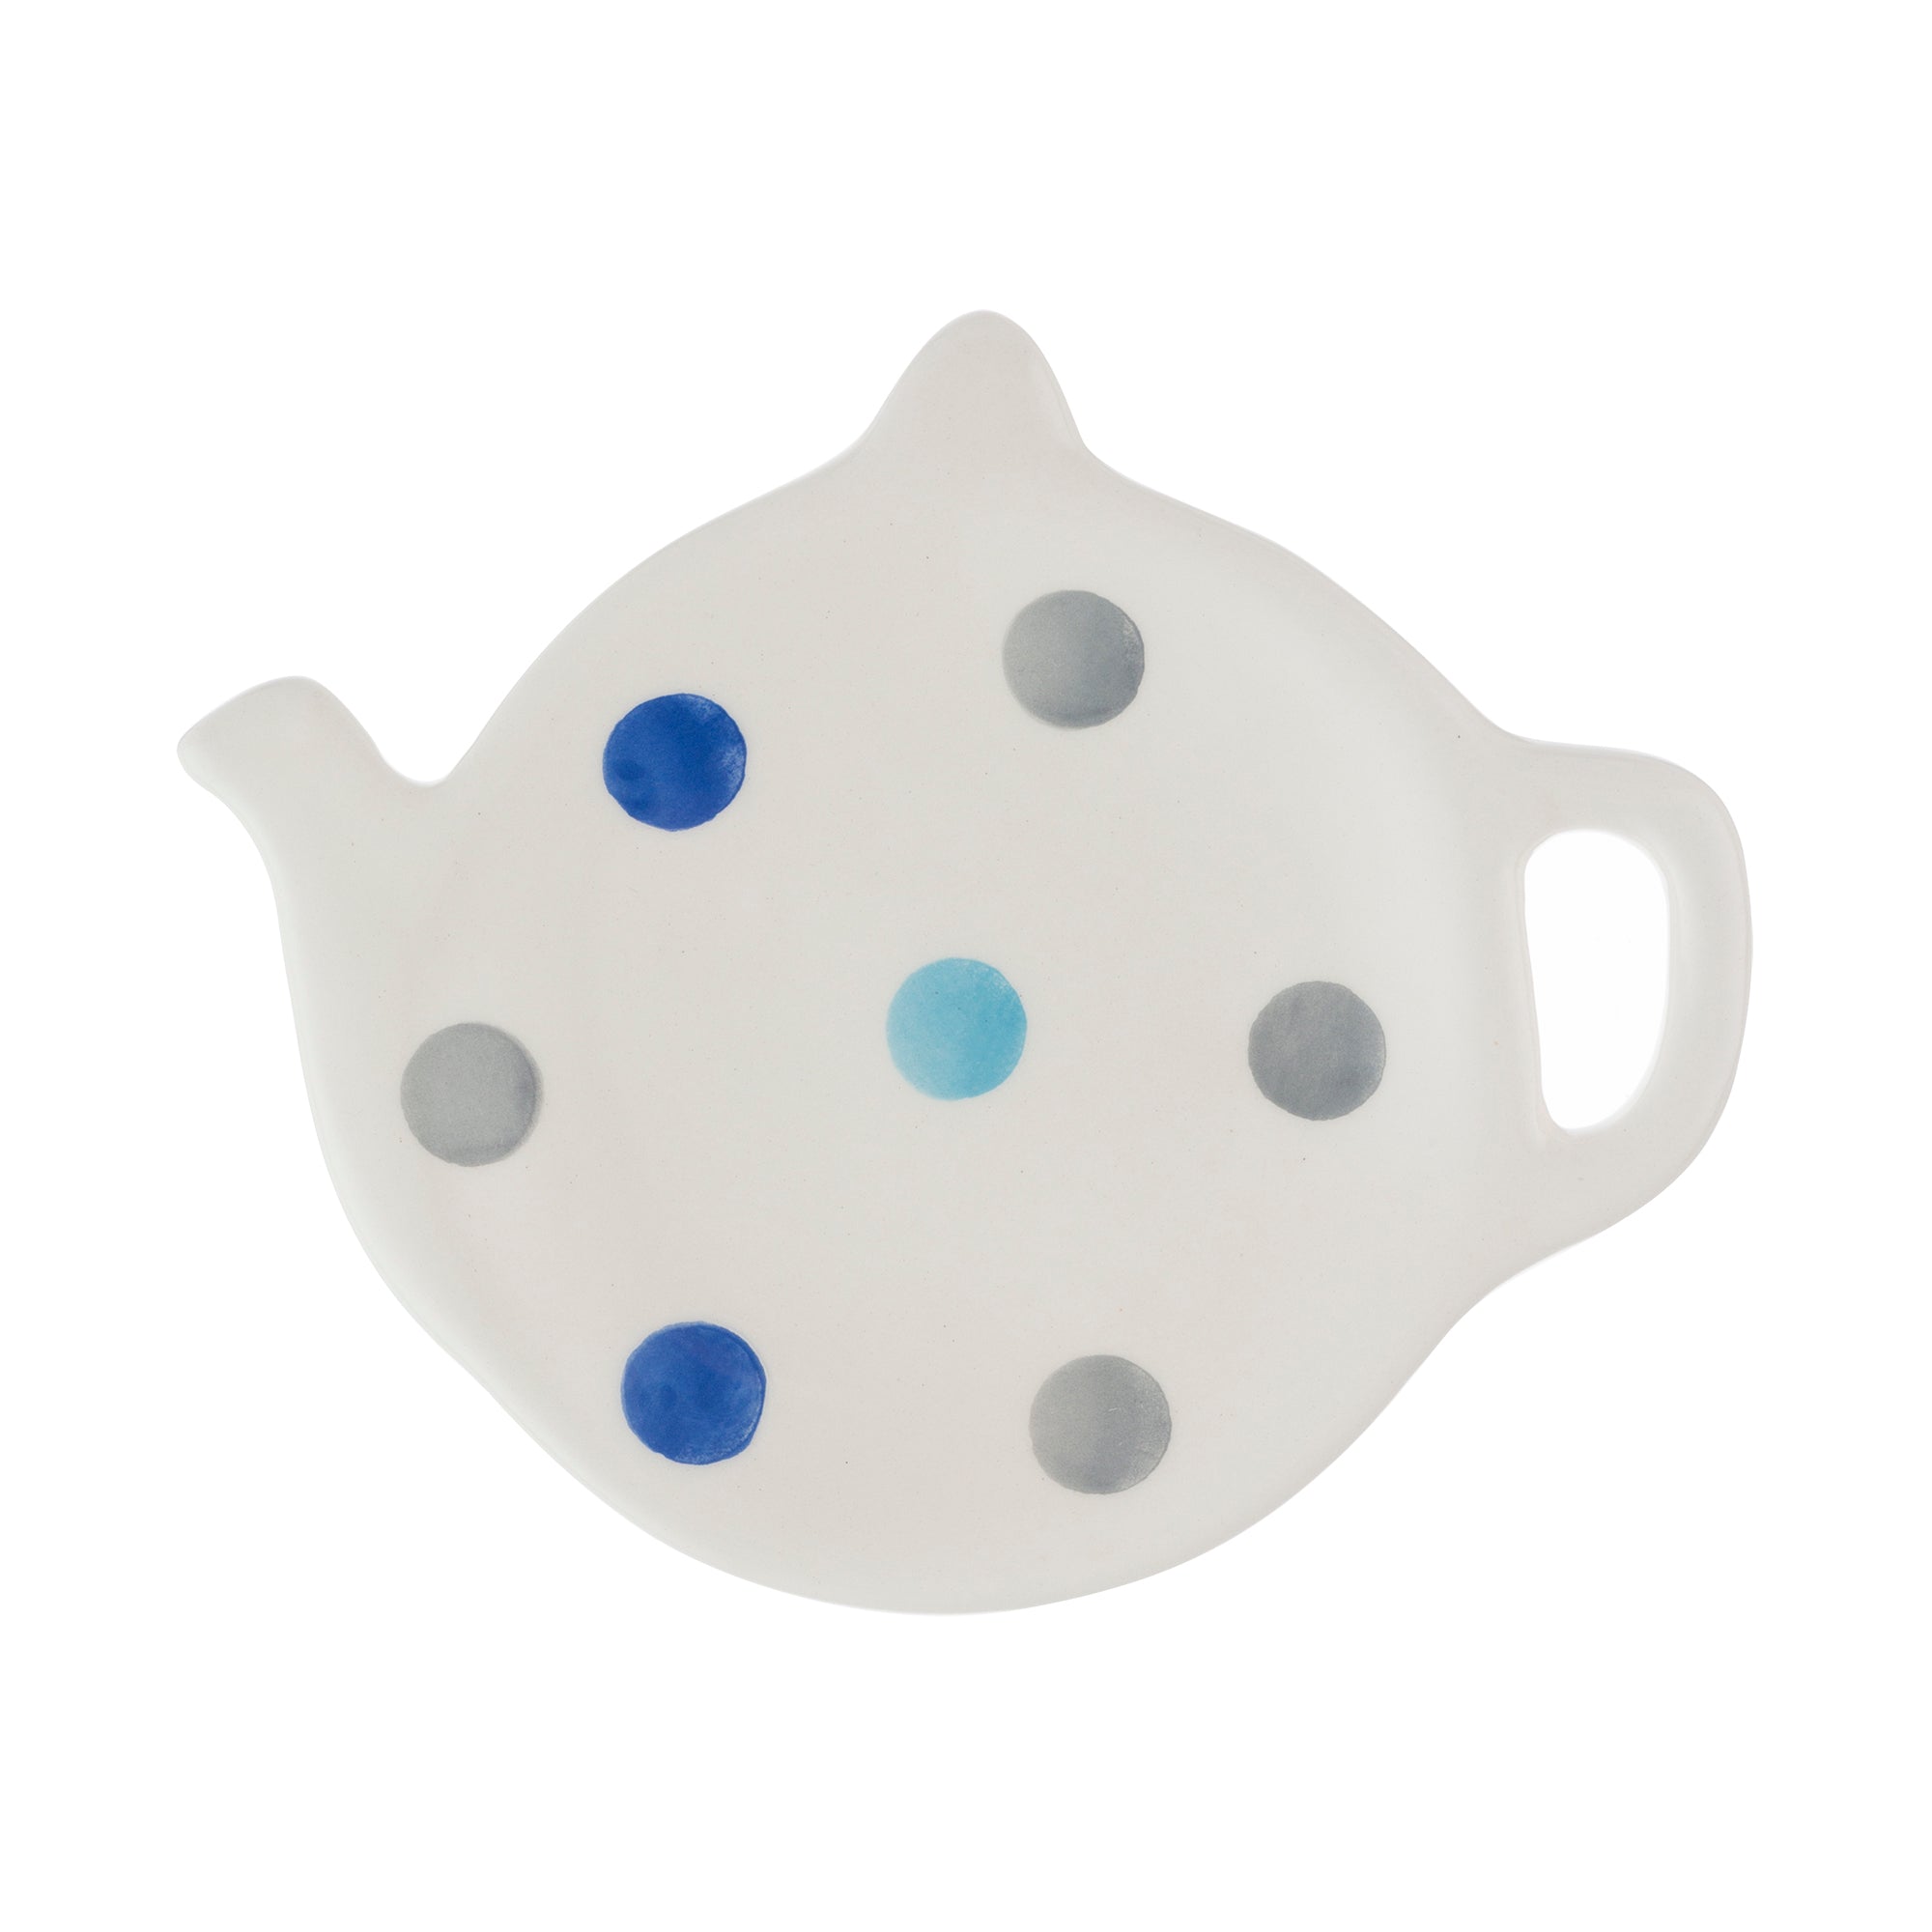 Padstow Ceramic White Hand Painted Tidy Rest Teabag Holder